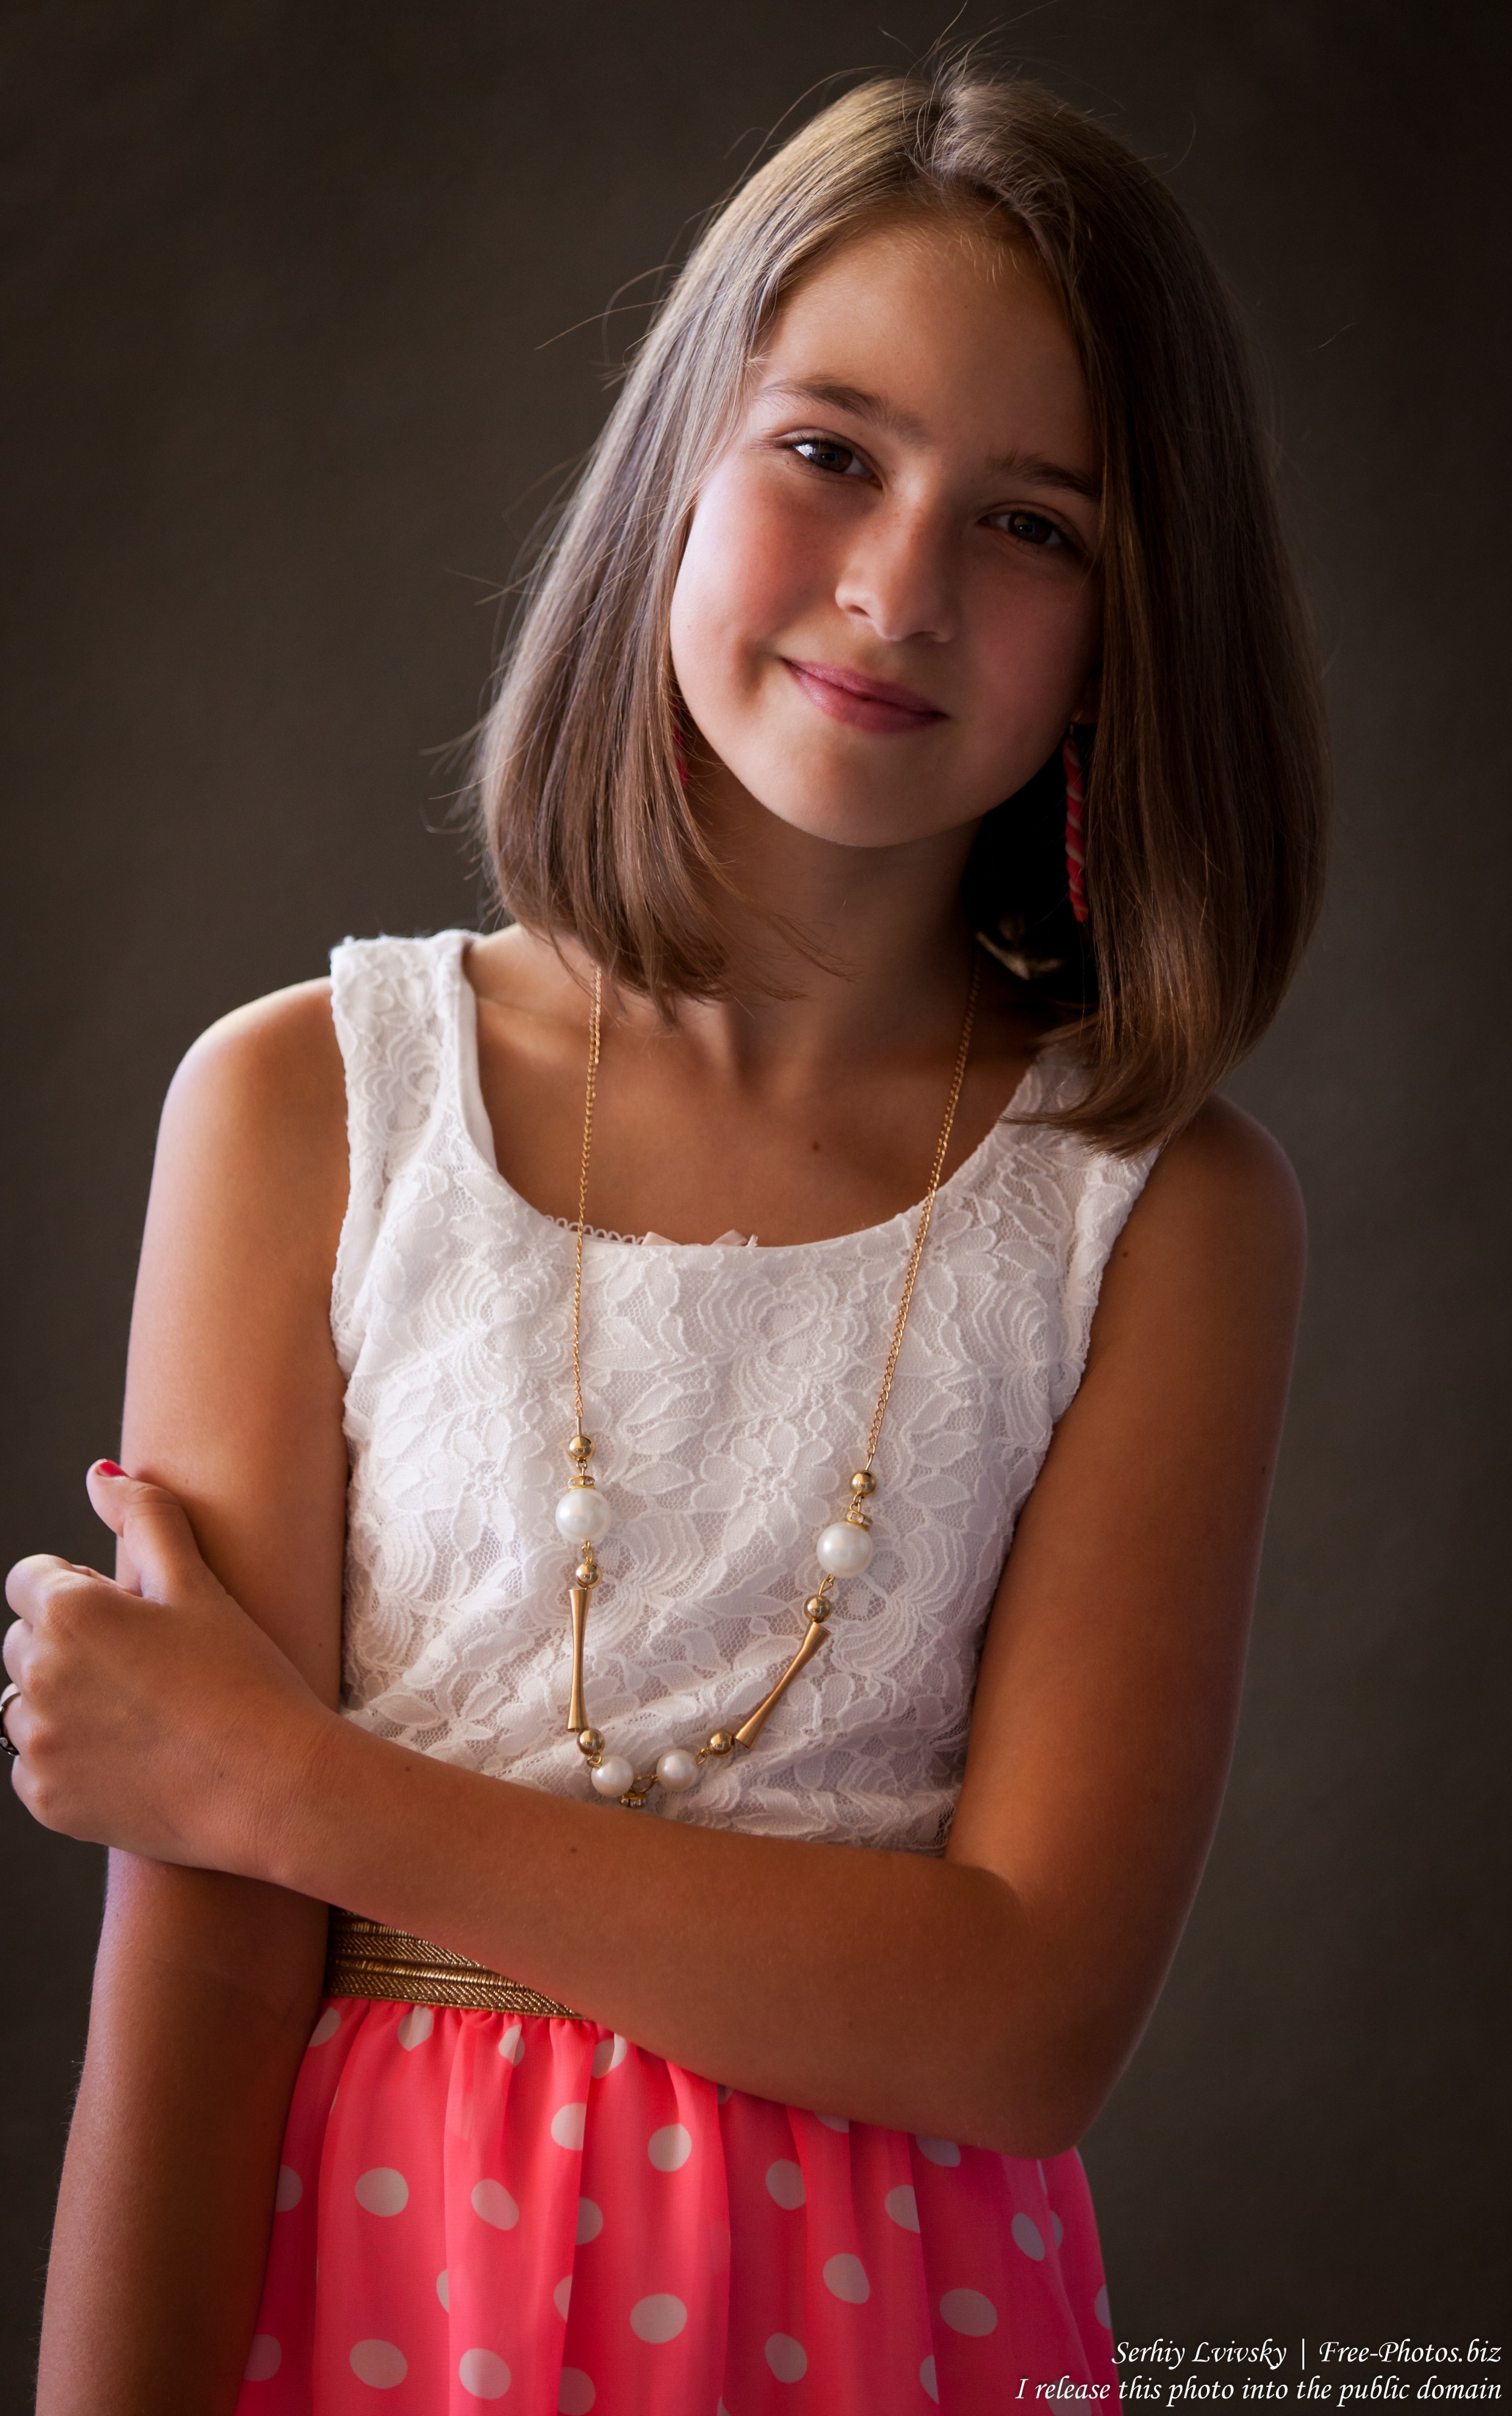 a 12-year-old girl photographed in July 2015 by Serhiy Lvivsky, picture 3